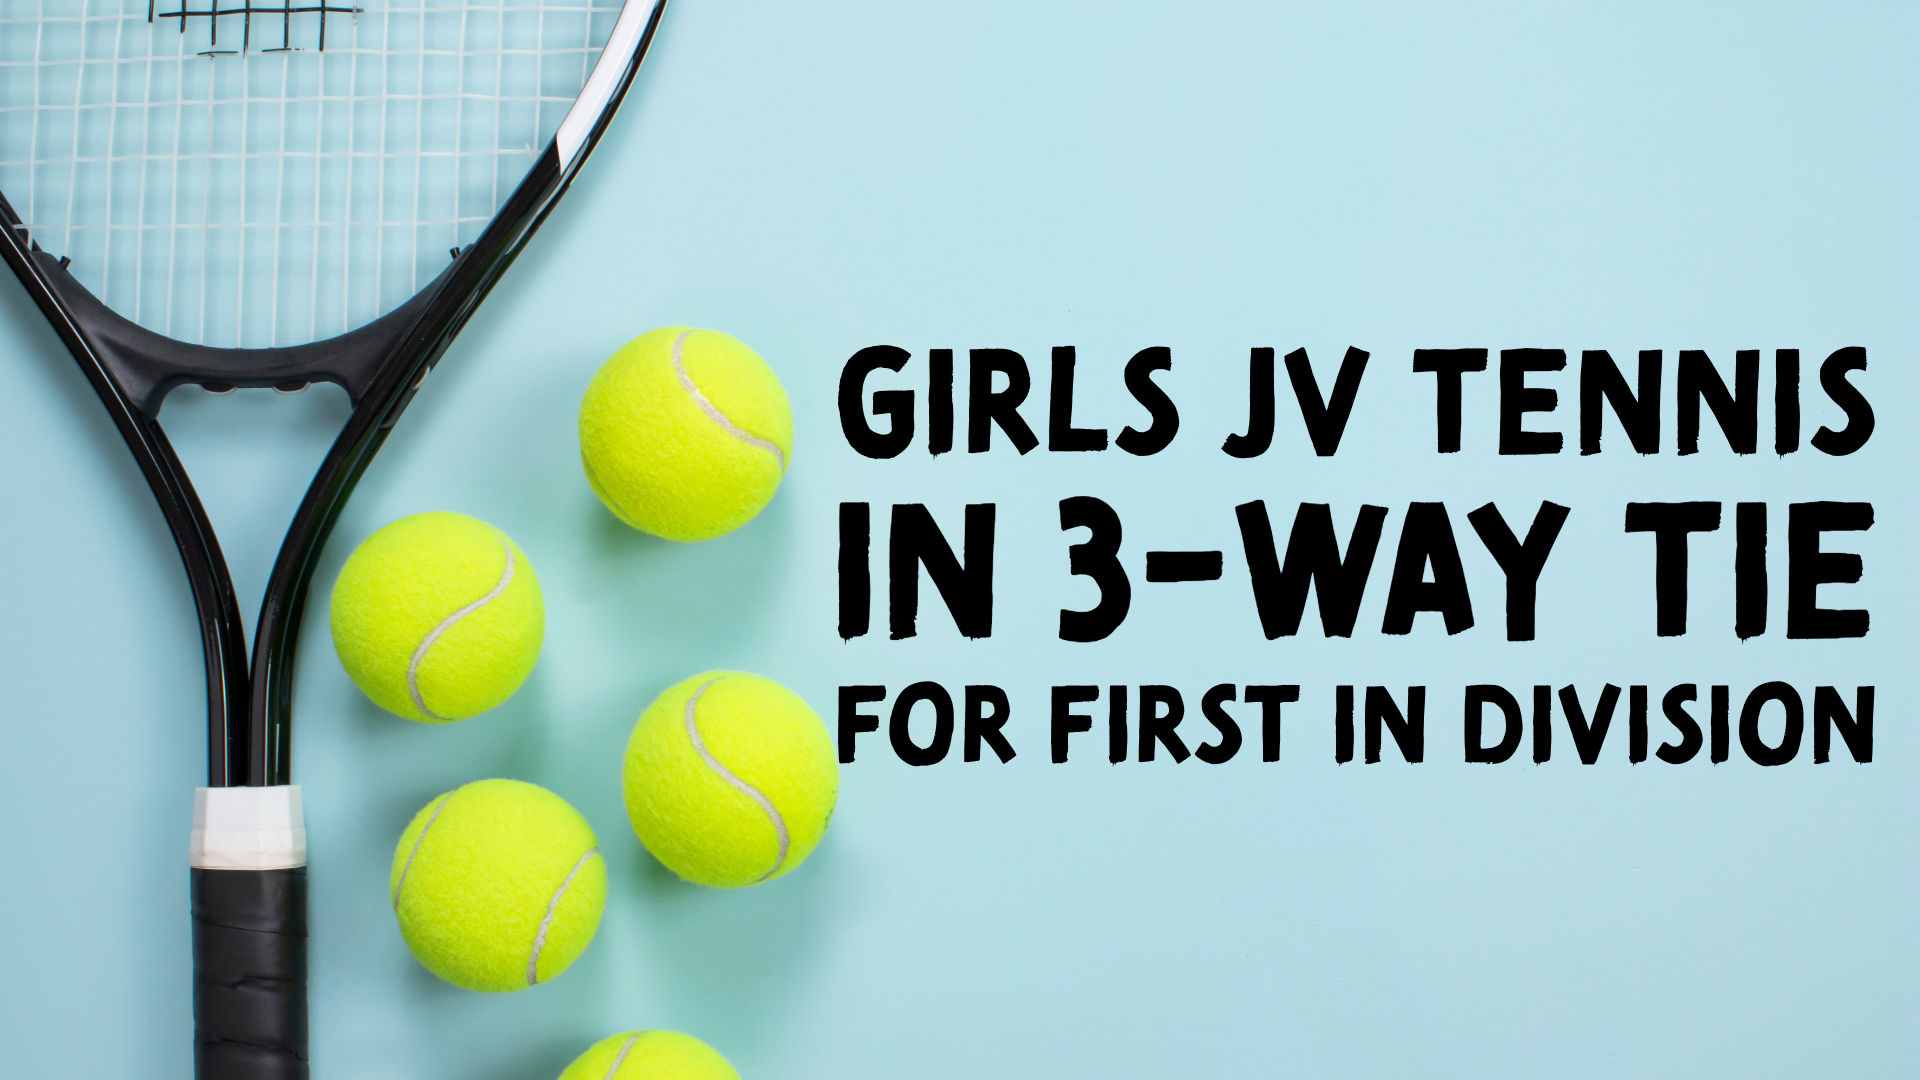 Girls Tennis in 3-Way Tie for First in Division